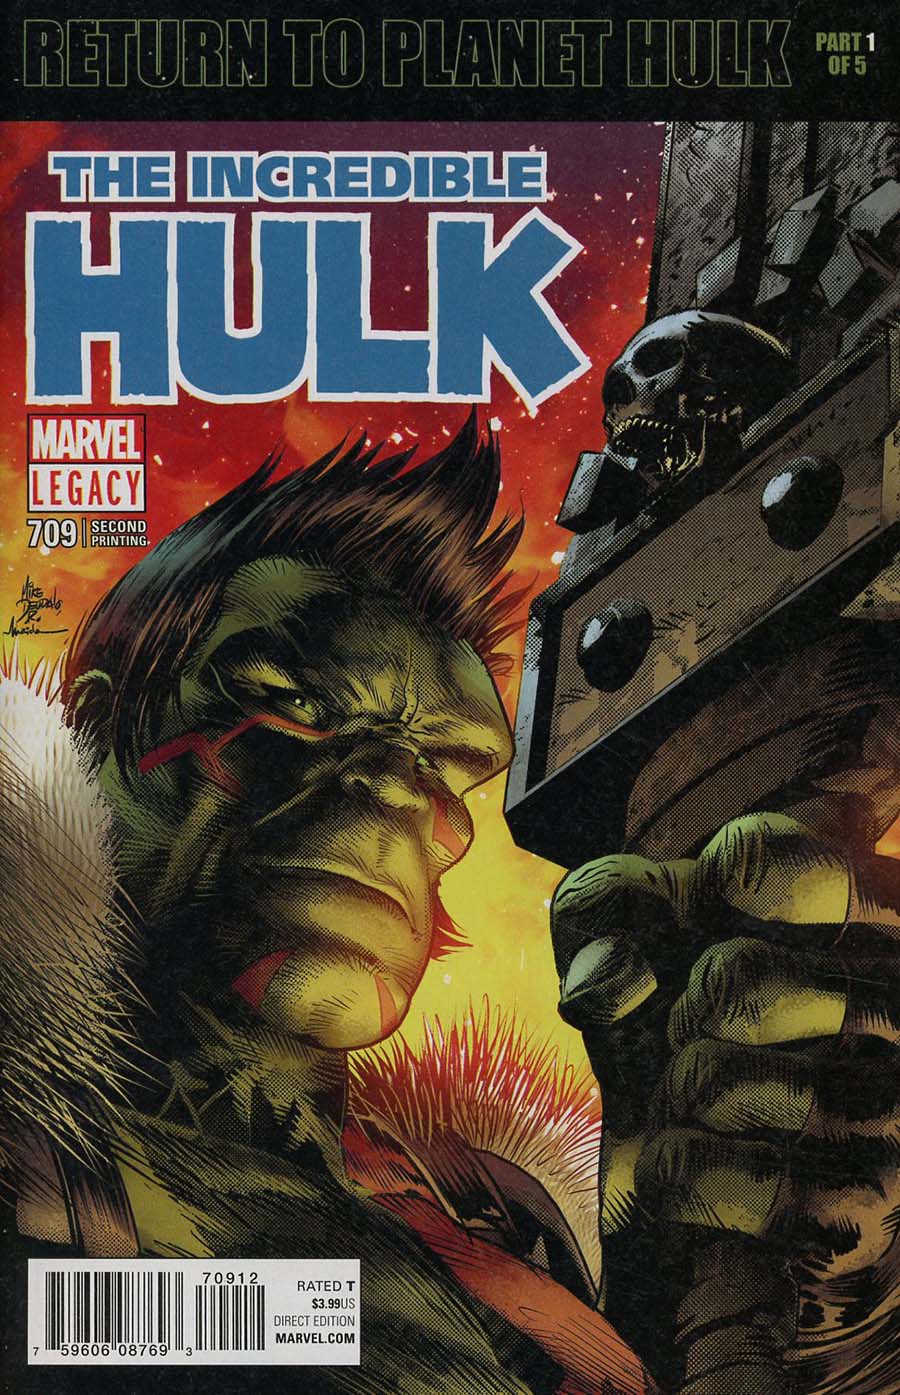 Incredible Hulk Vol 4 #709 Cover E 2nd Ptg Variant Mike Deodato Jr Cover (Marvel Legacy Tie-In)